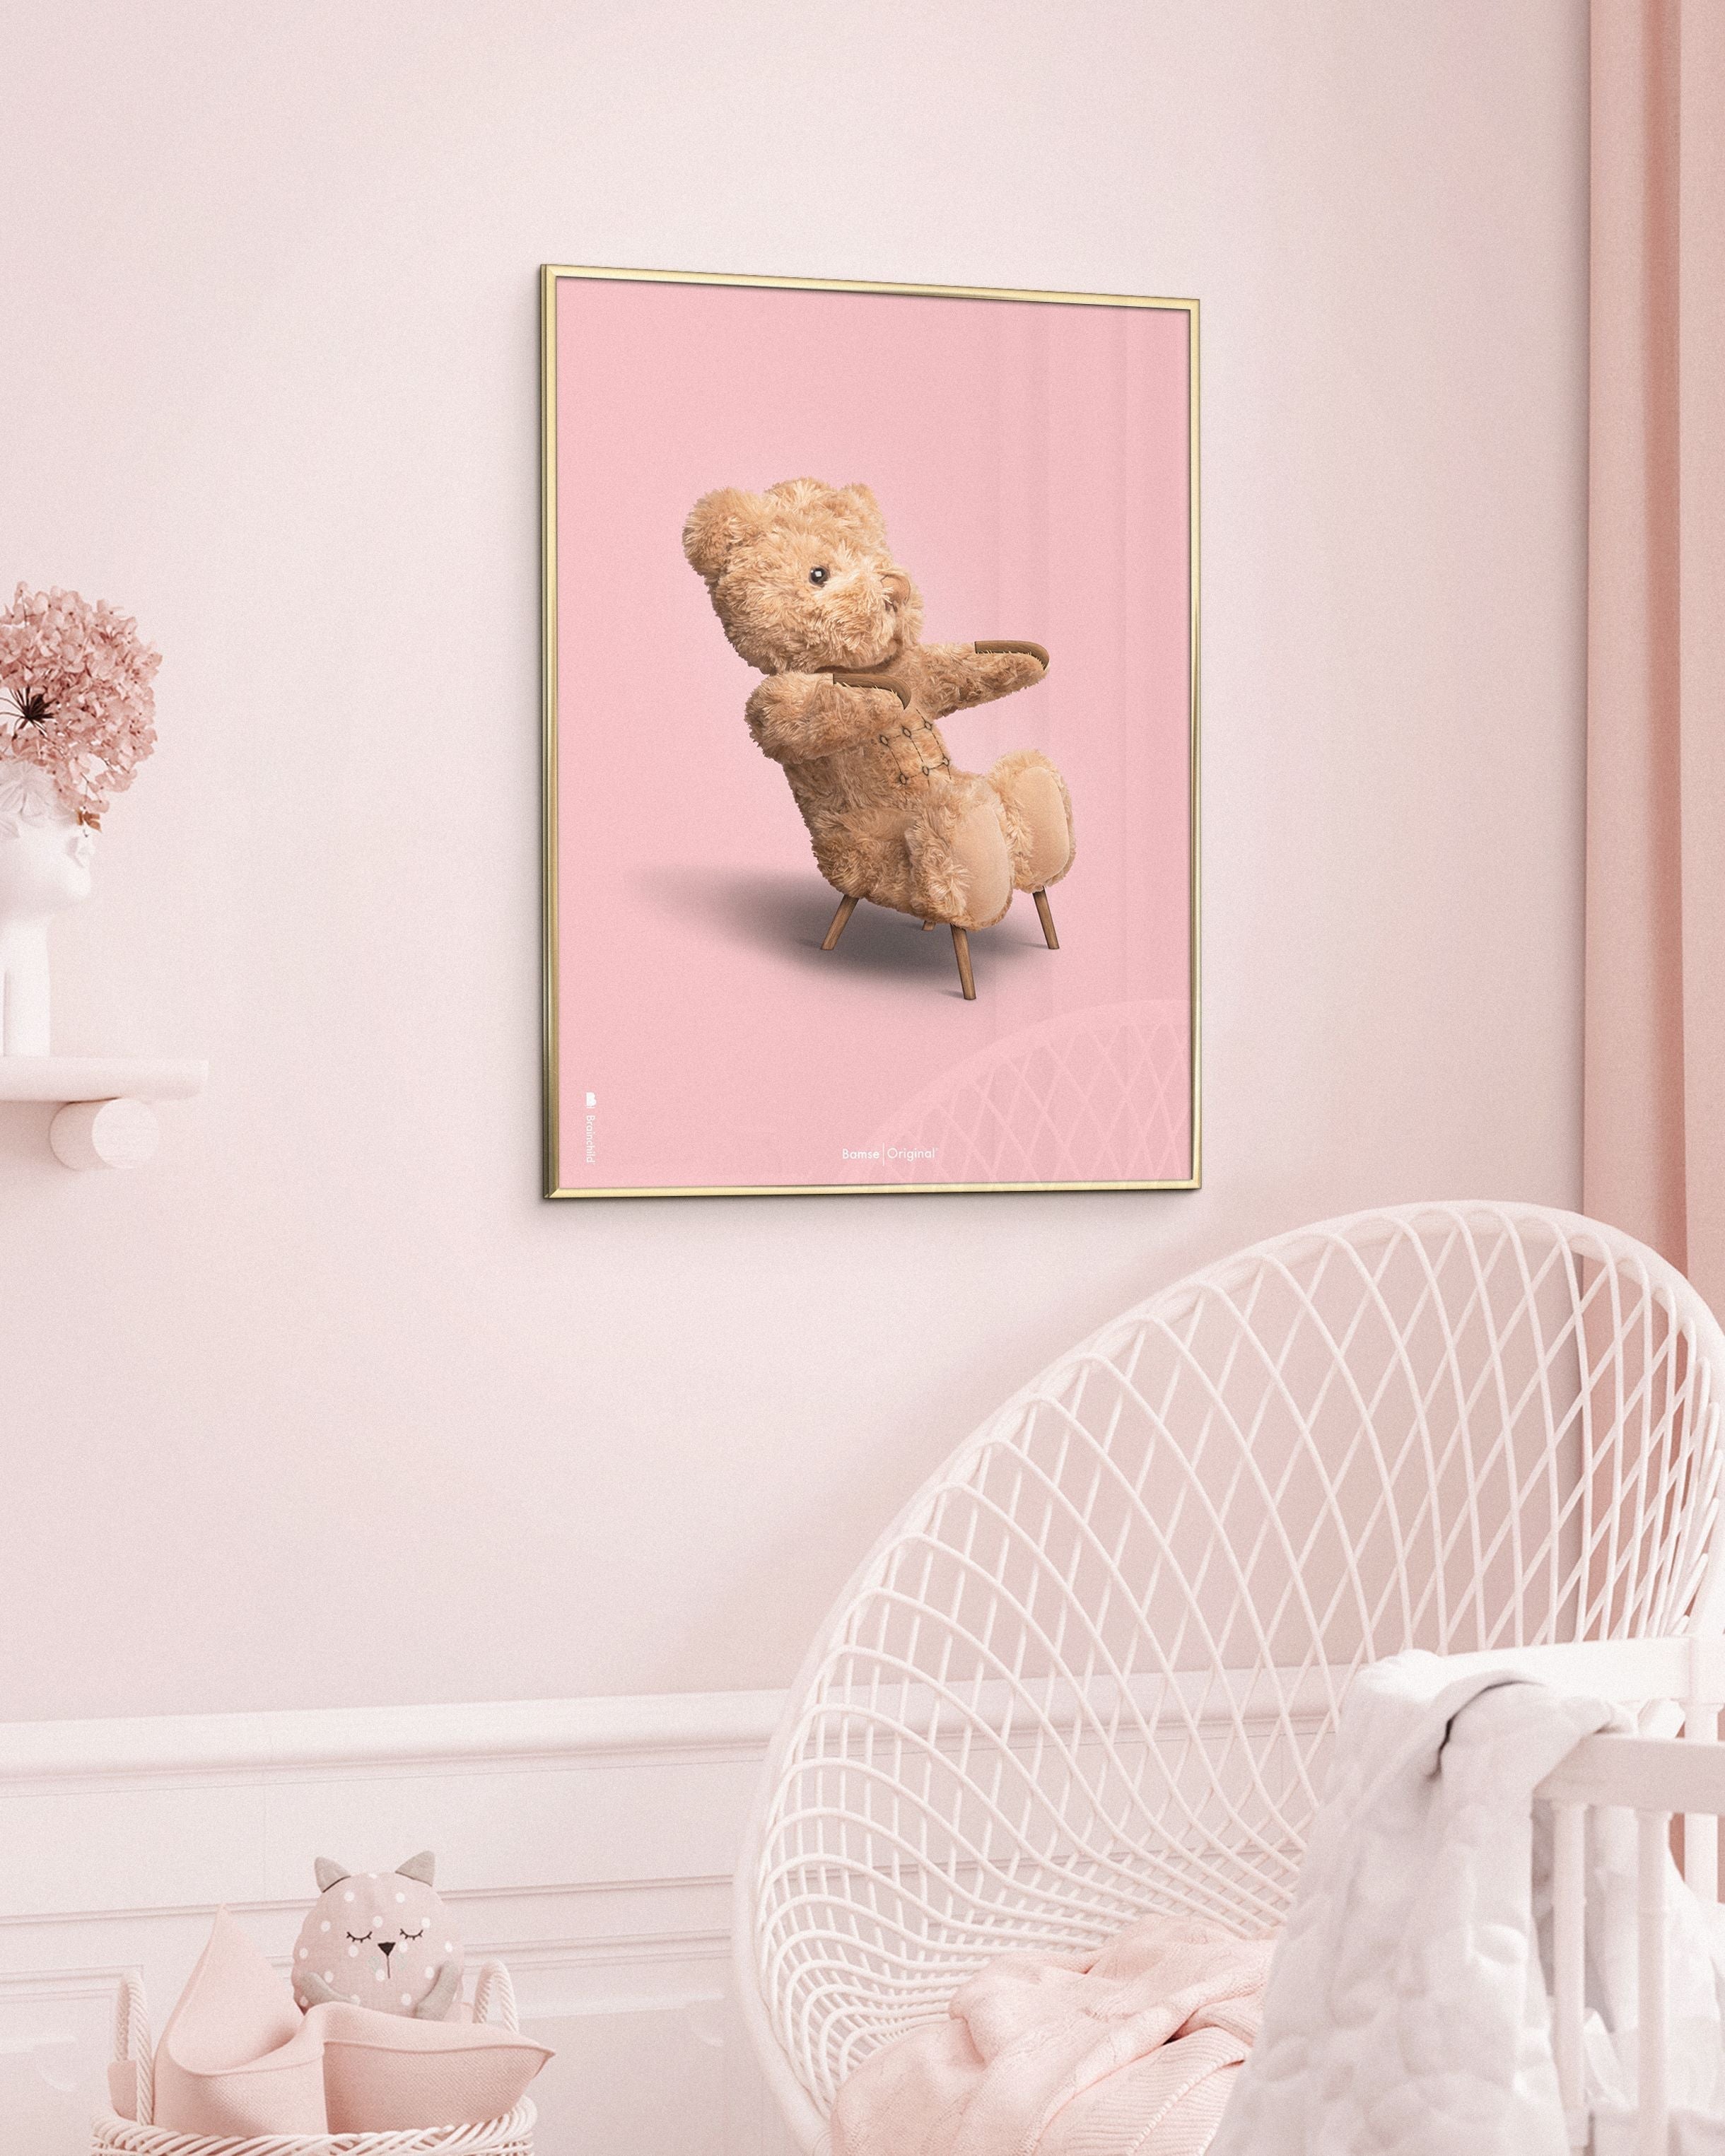 Brainchild Teddy Bear Classic Poster Frame Made Of Black Lacquered Wood 30x40 Cm, Pink Background